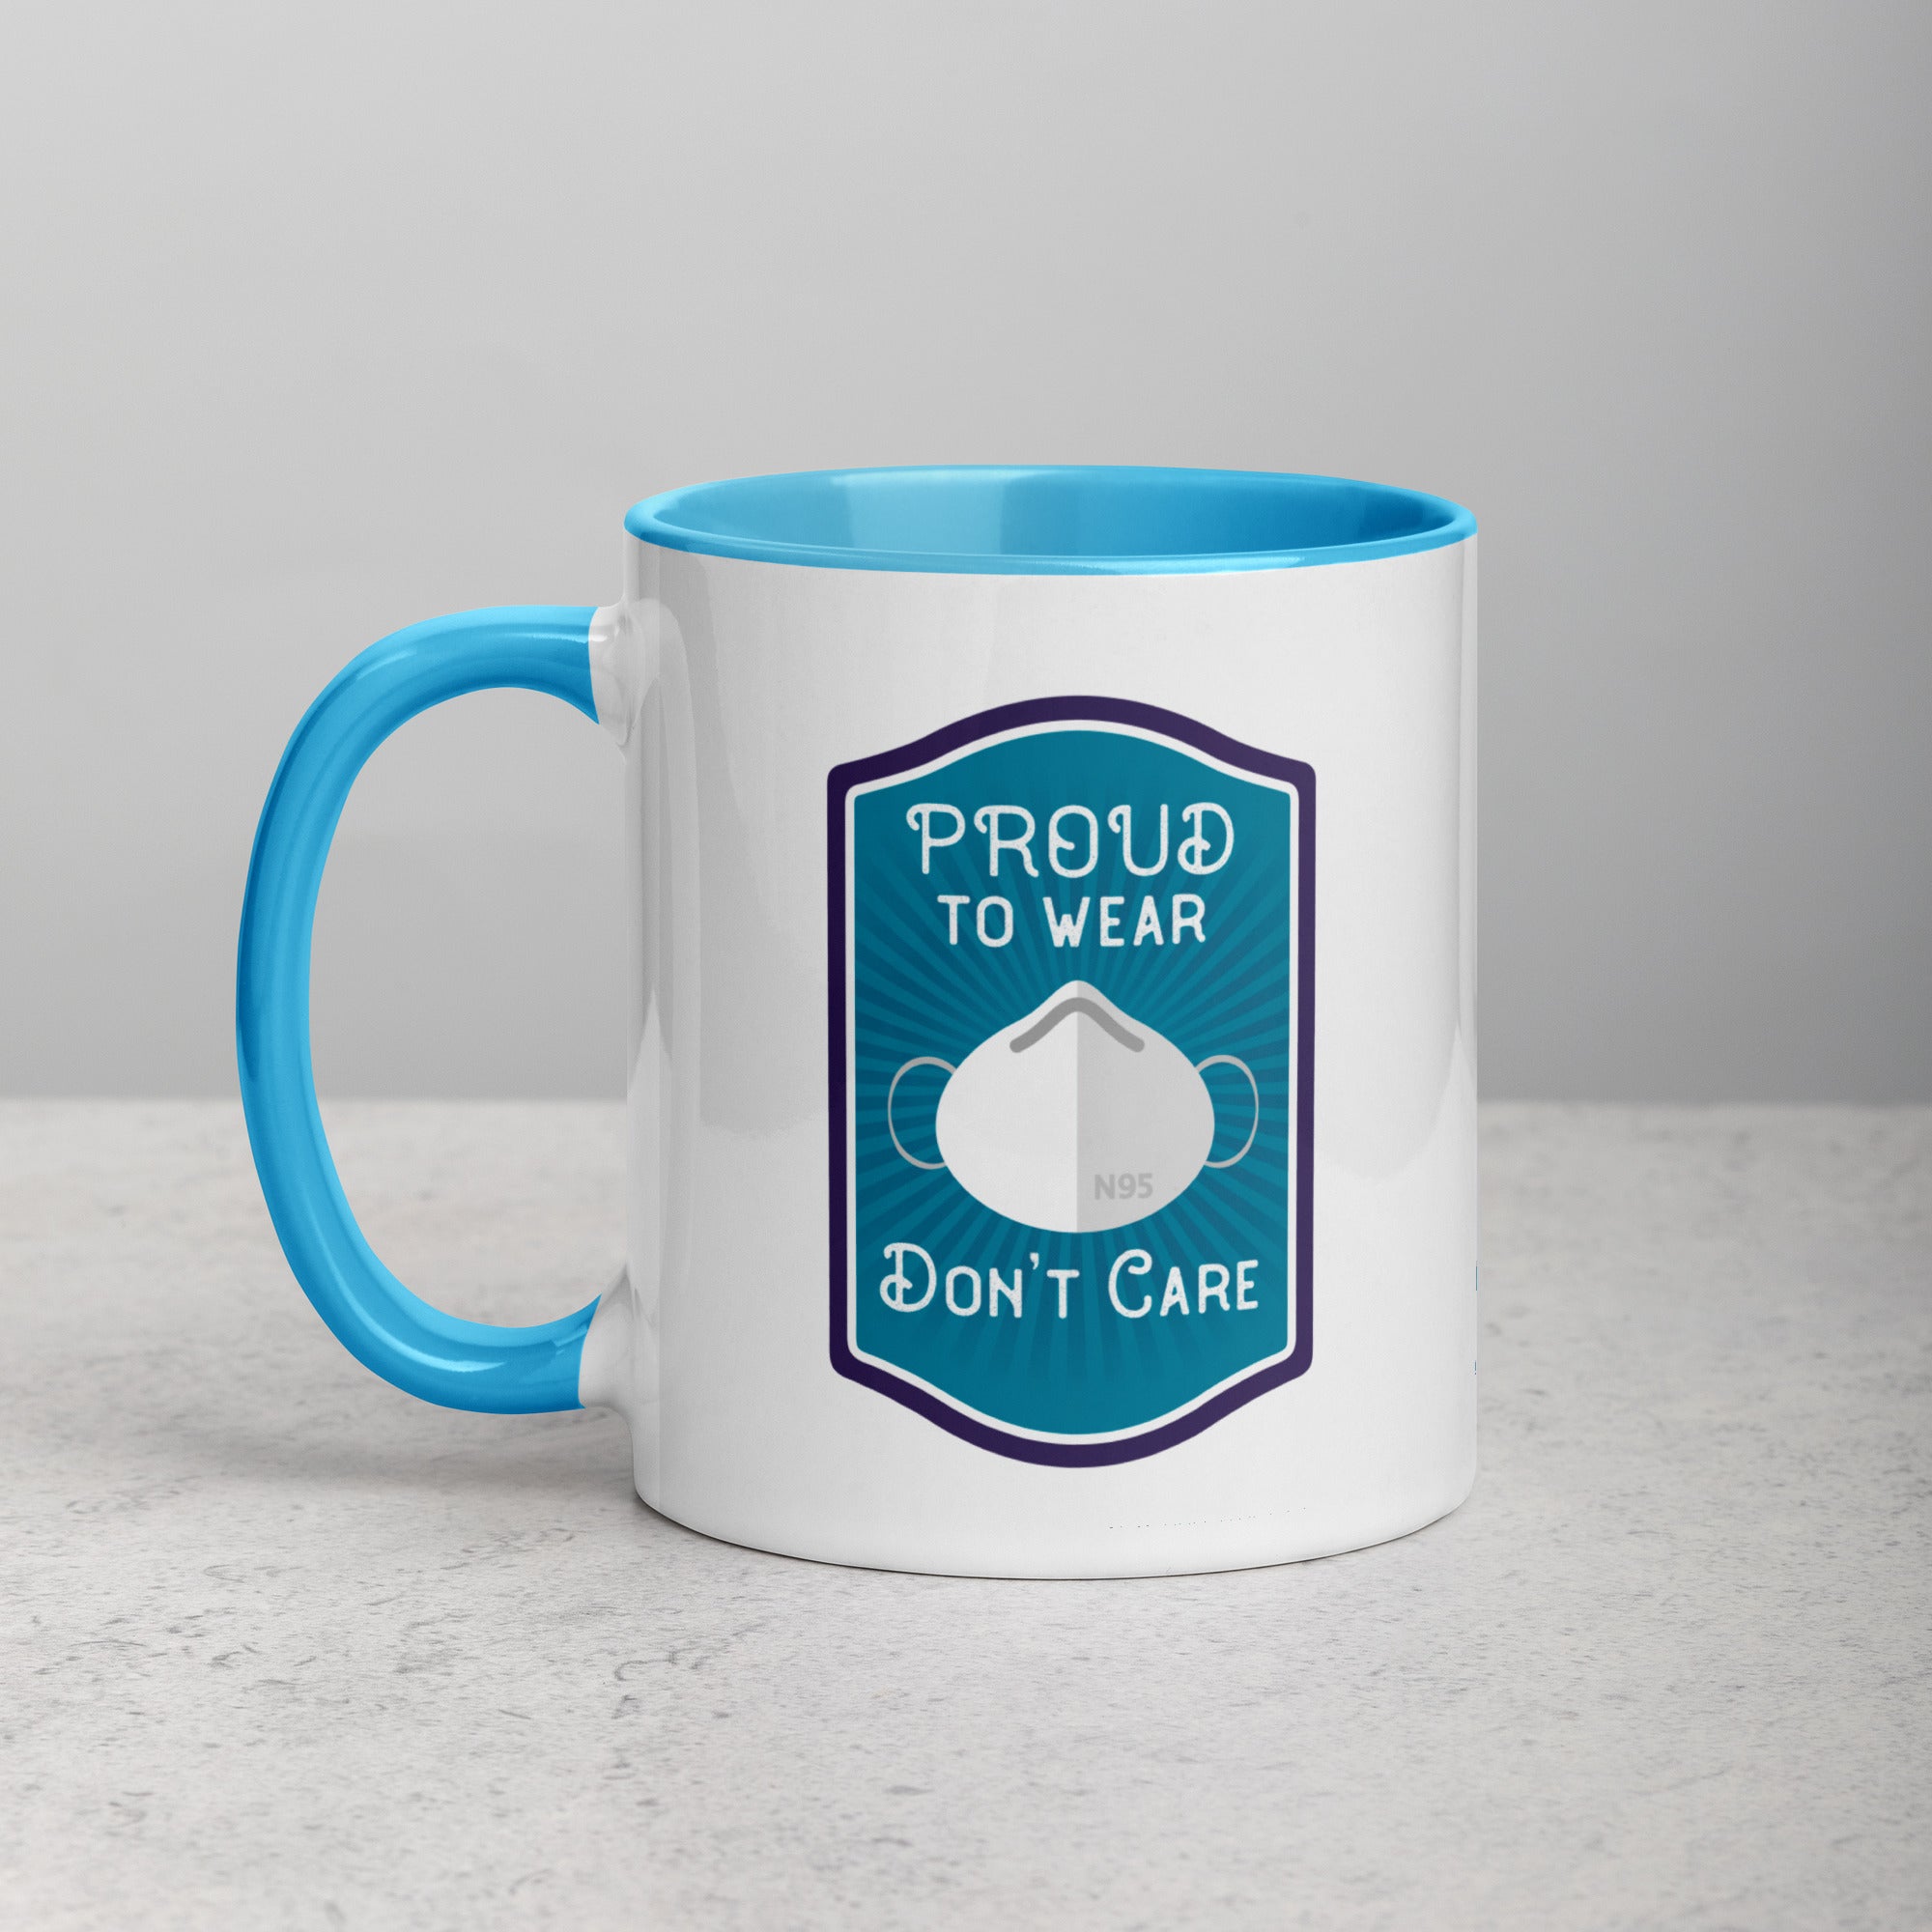 side view of Proud to wear, don't care mug with blue interior